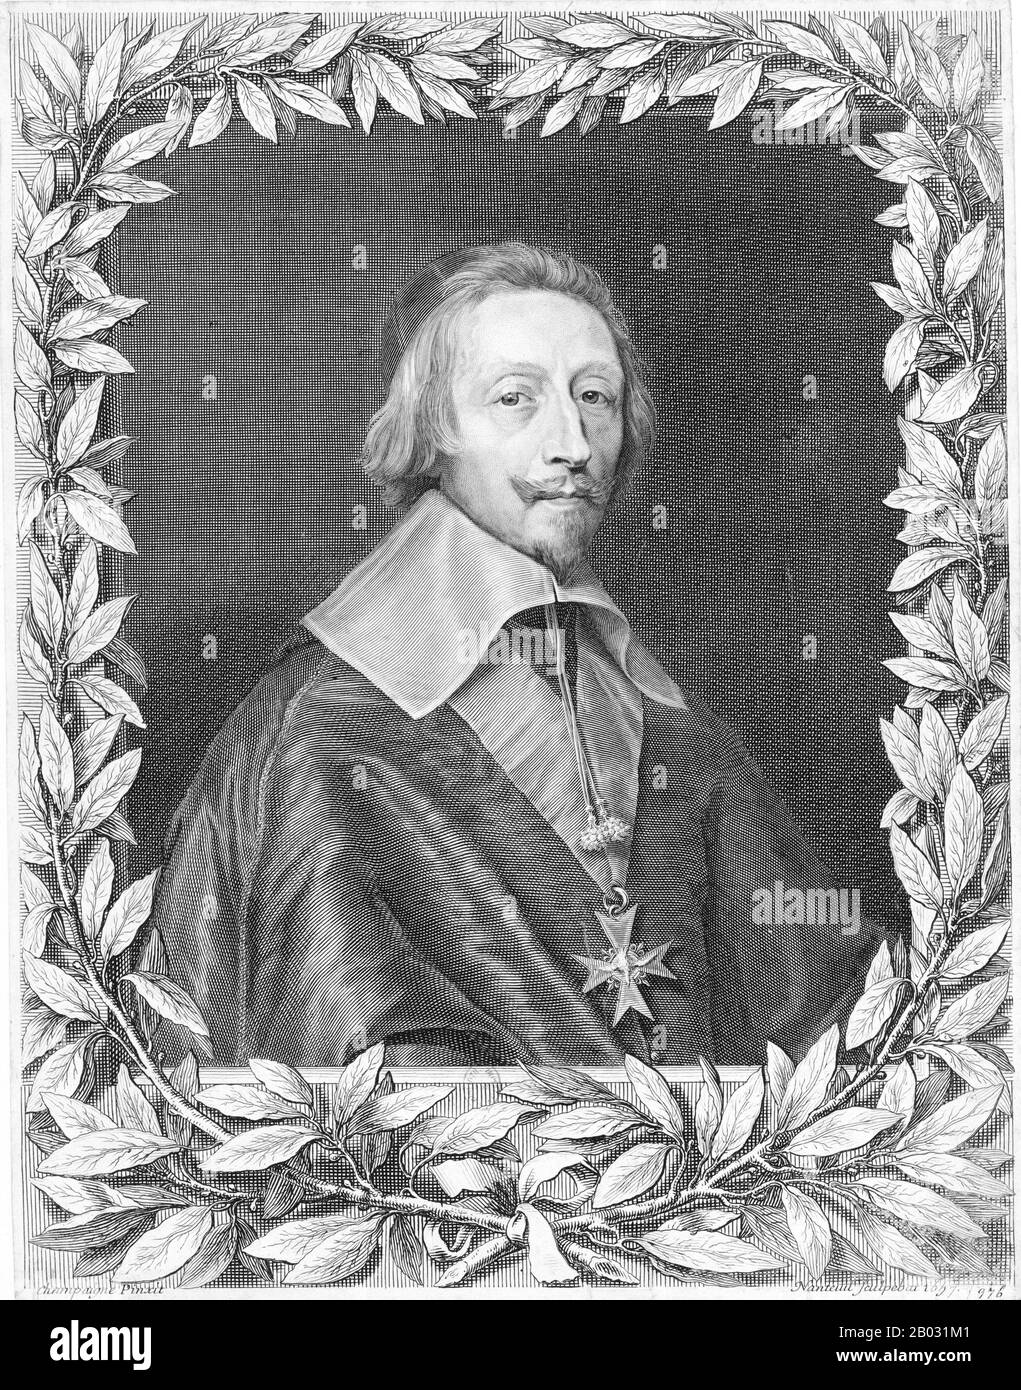 Armand Jean du Plessis, Cardinal-Duke of Richelieu and of Fronsac (September 1585 – 4 December 1642), commonly referred to as Cardinal Richelieu, was a French clergyman, noble and statesman. He was consecrated as a bishop in 1607 and was appointed Foreign Secretary in 1616.   Richelieu soon rose in both the Catholic Church and the French government, becoming a cardinal in 1622, and King Louis XIII's chief minister in 1624. He remained in office until his death in 1642; he was succeeded by Cardinal Mazarin, whose career he had fostered. Stock Photo